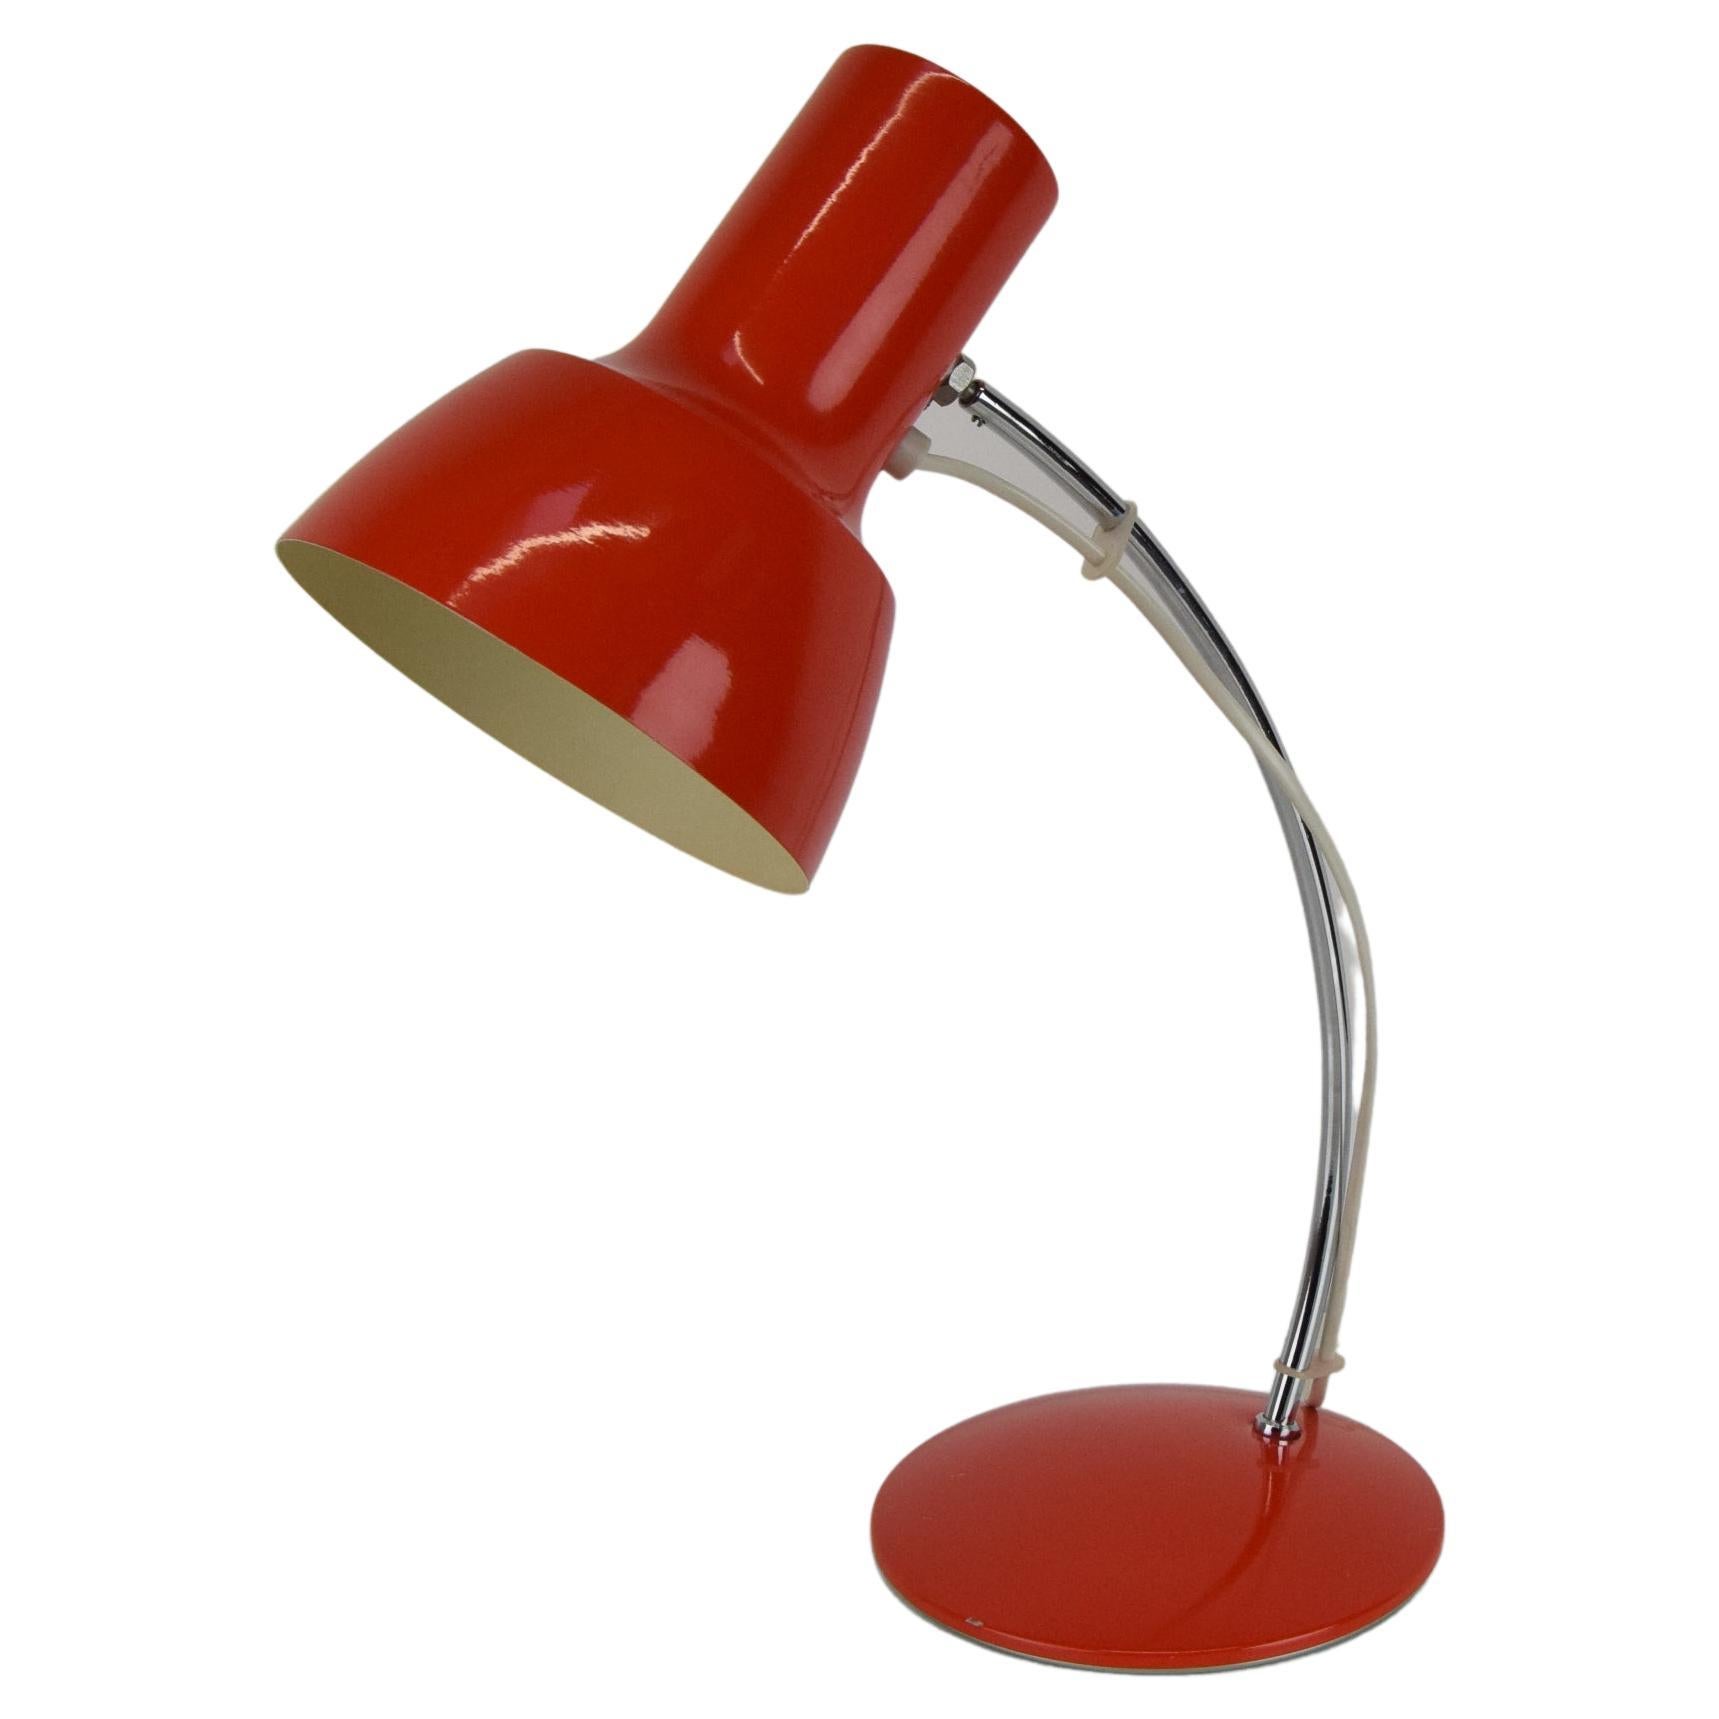 Midcentury Red Table Lamp/Napako Designed by Josef Hurka, 1970s For Sale